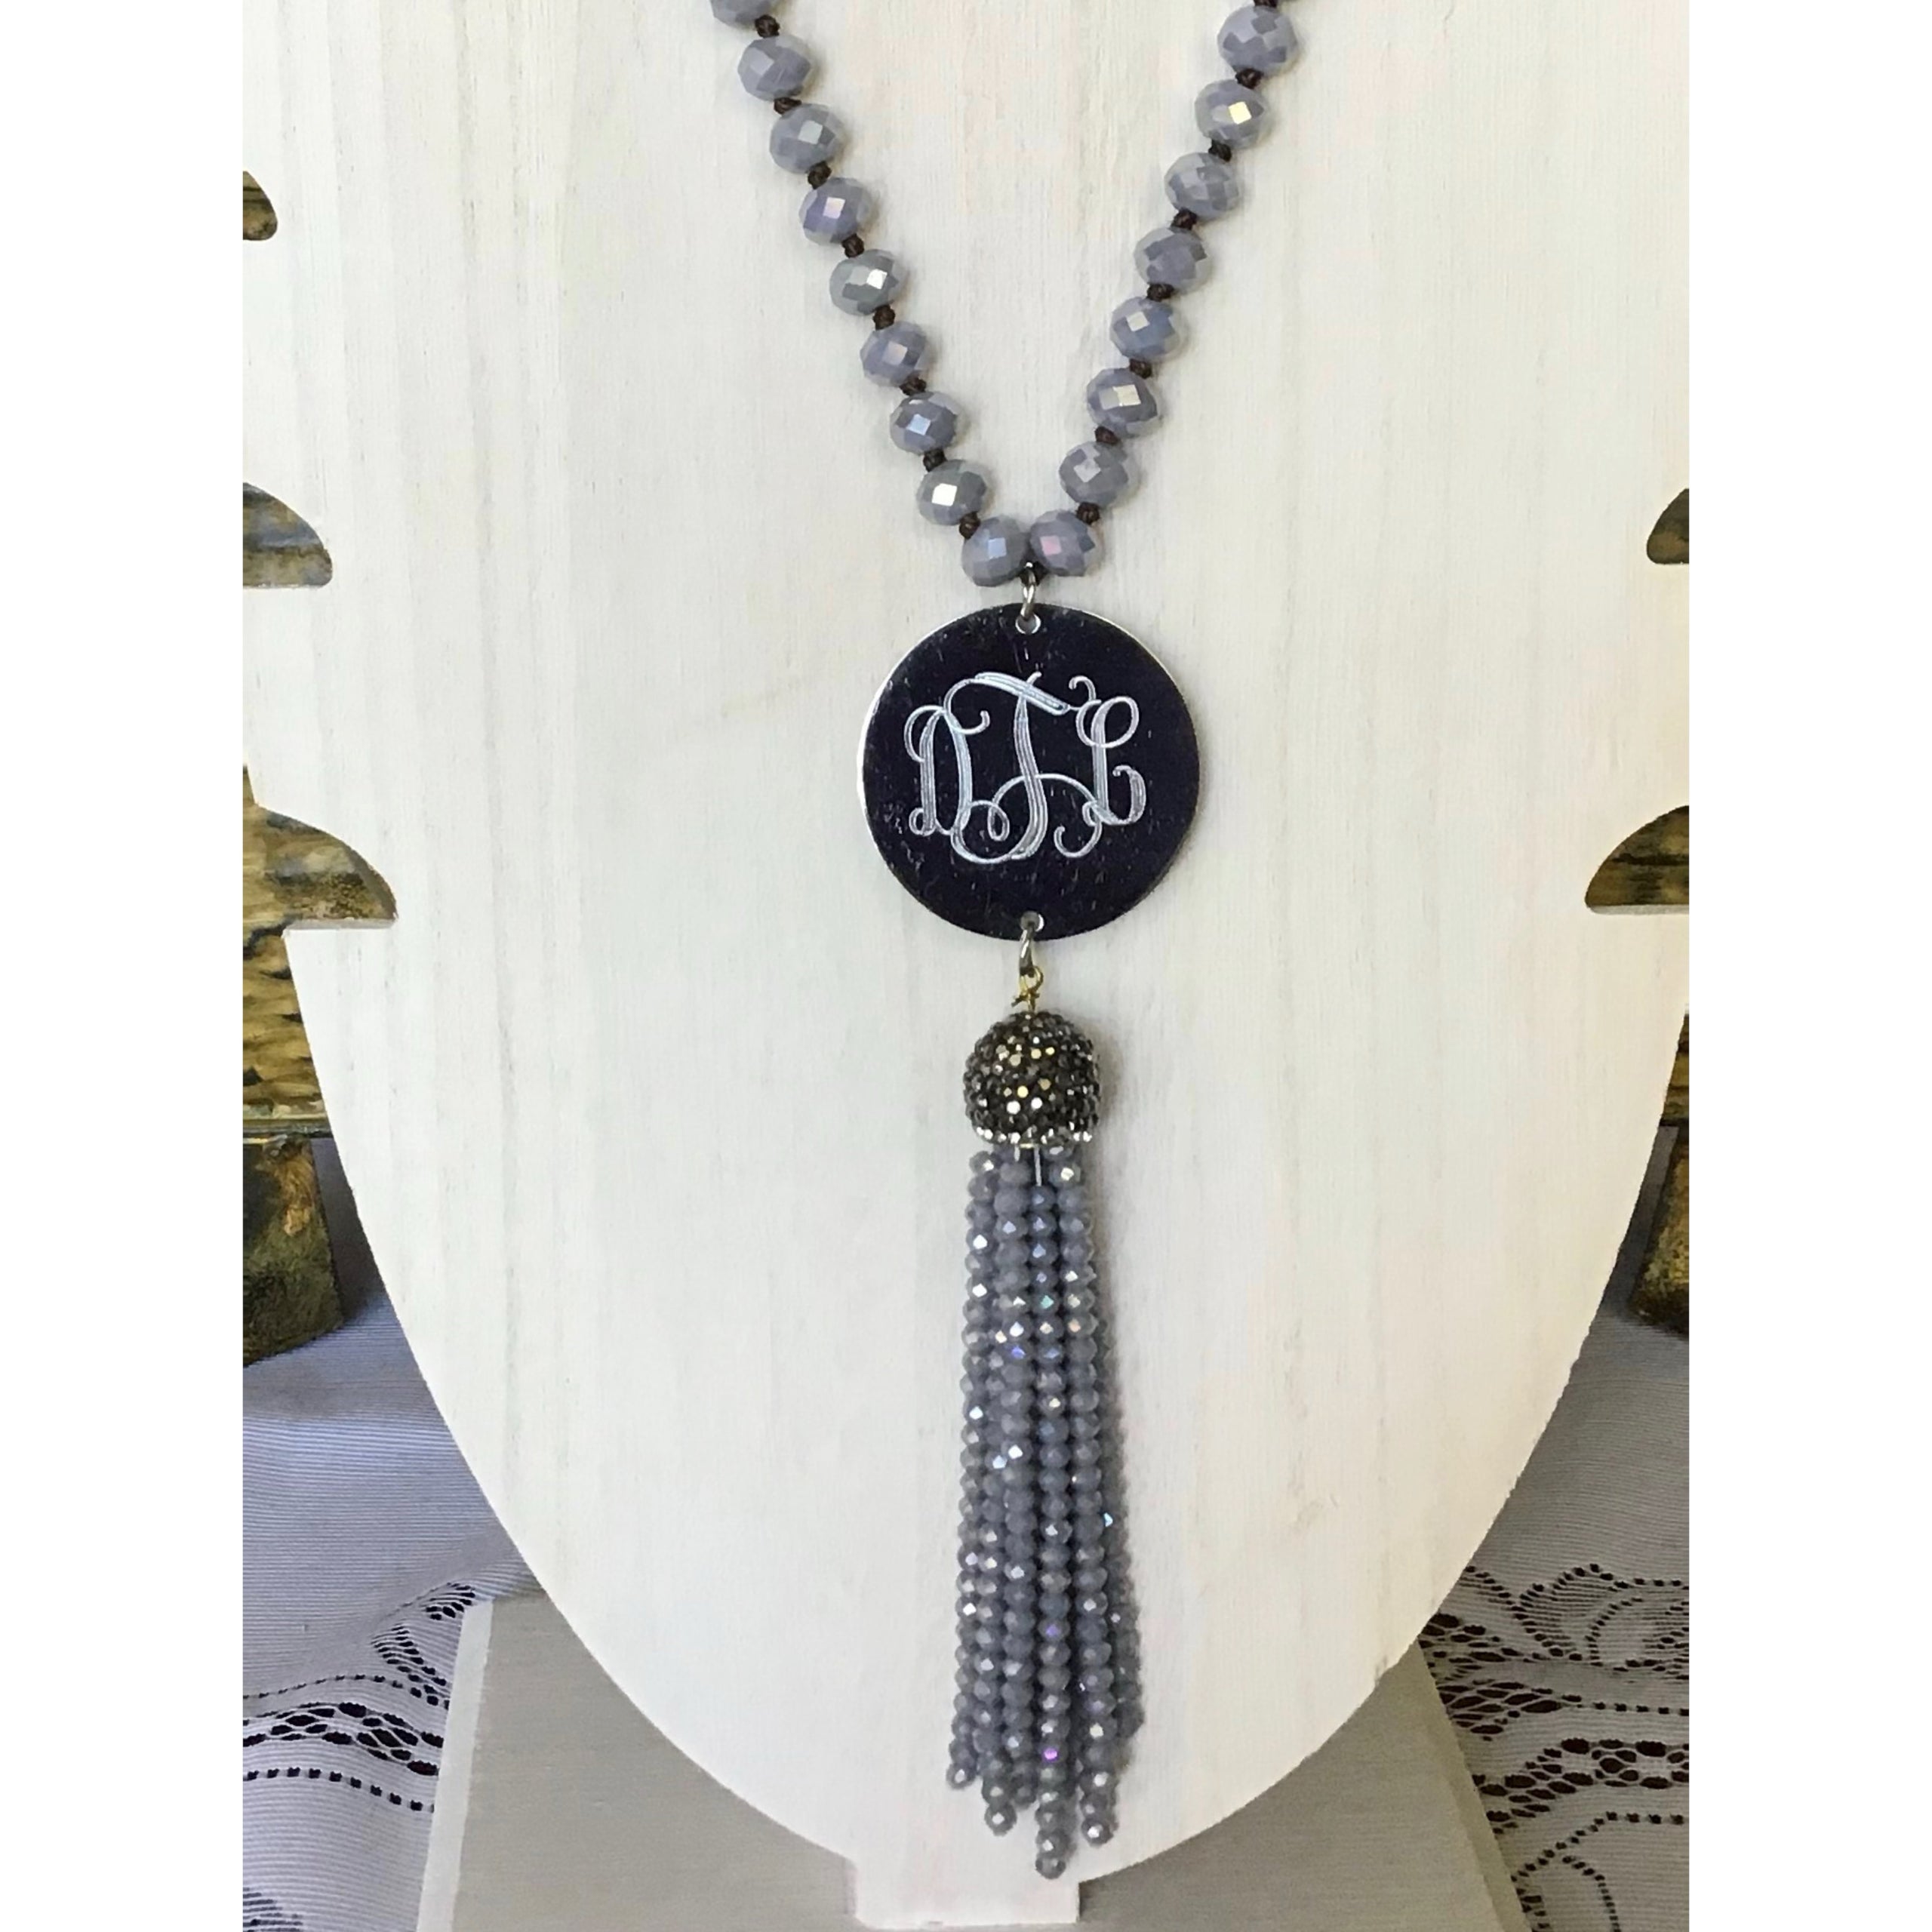 Bead and Tassels Diamond Pendant with Chain